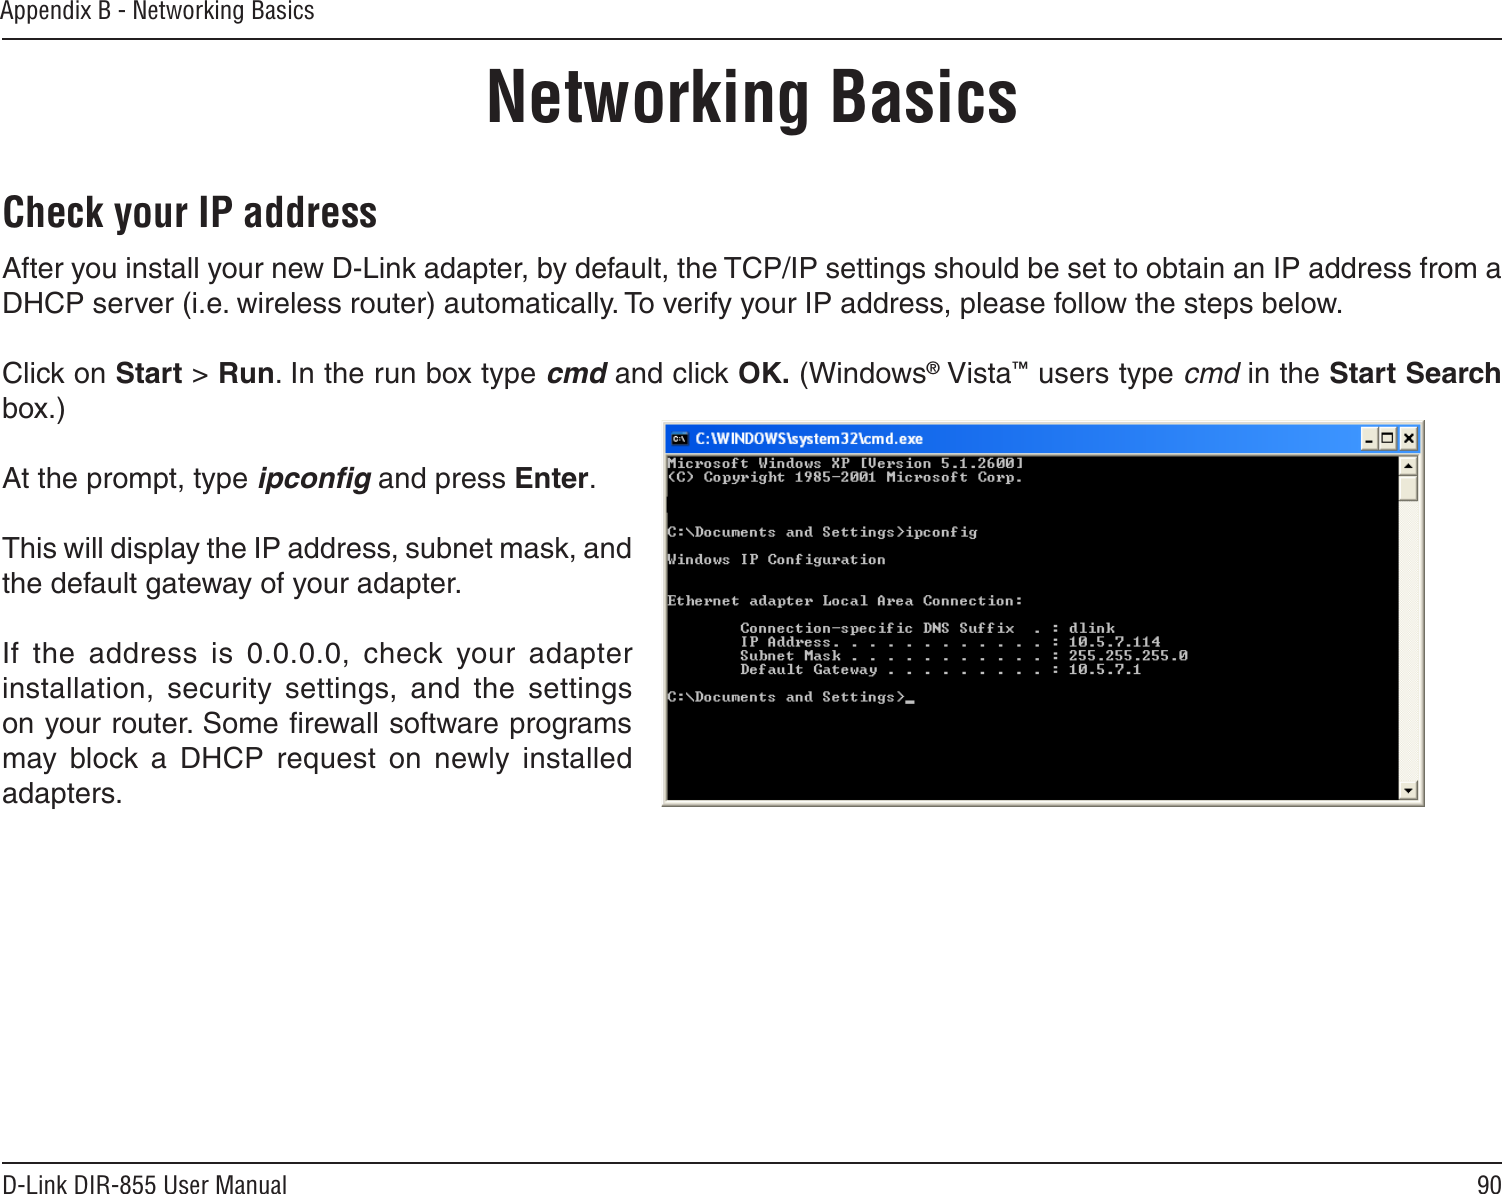 90D-Link DIR-855 User ManualAppendix B - Networking BasicsNetworking BasicsCheck your IP addressAfter you install your new D-Link adapter, by default, the TCP/IP settings should be set to obtain an IP address from a DHCP server (i.e. wireless router) automatically. To verify your IP address, please follow the steps below.Click on Start &gt; Run. In the run box type cmd and click OK. (Windows® Vista™ users type cmd in the Start Search box.)At the prompt, type ipconﬁg and press Enter.This will display the IP address, subnet mask, and the default gateway of your adapter.If  the  address  is  0.0.0.0,  check  your  adapter installation,  security  settings,  and  the  settings on your router. Some ﬁrewall software programs may  block  a  DHCP  request  on  newly  installed adapters. 